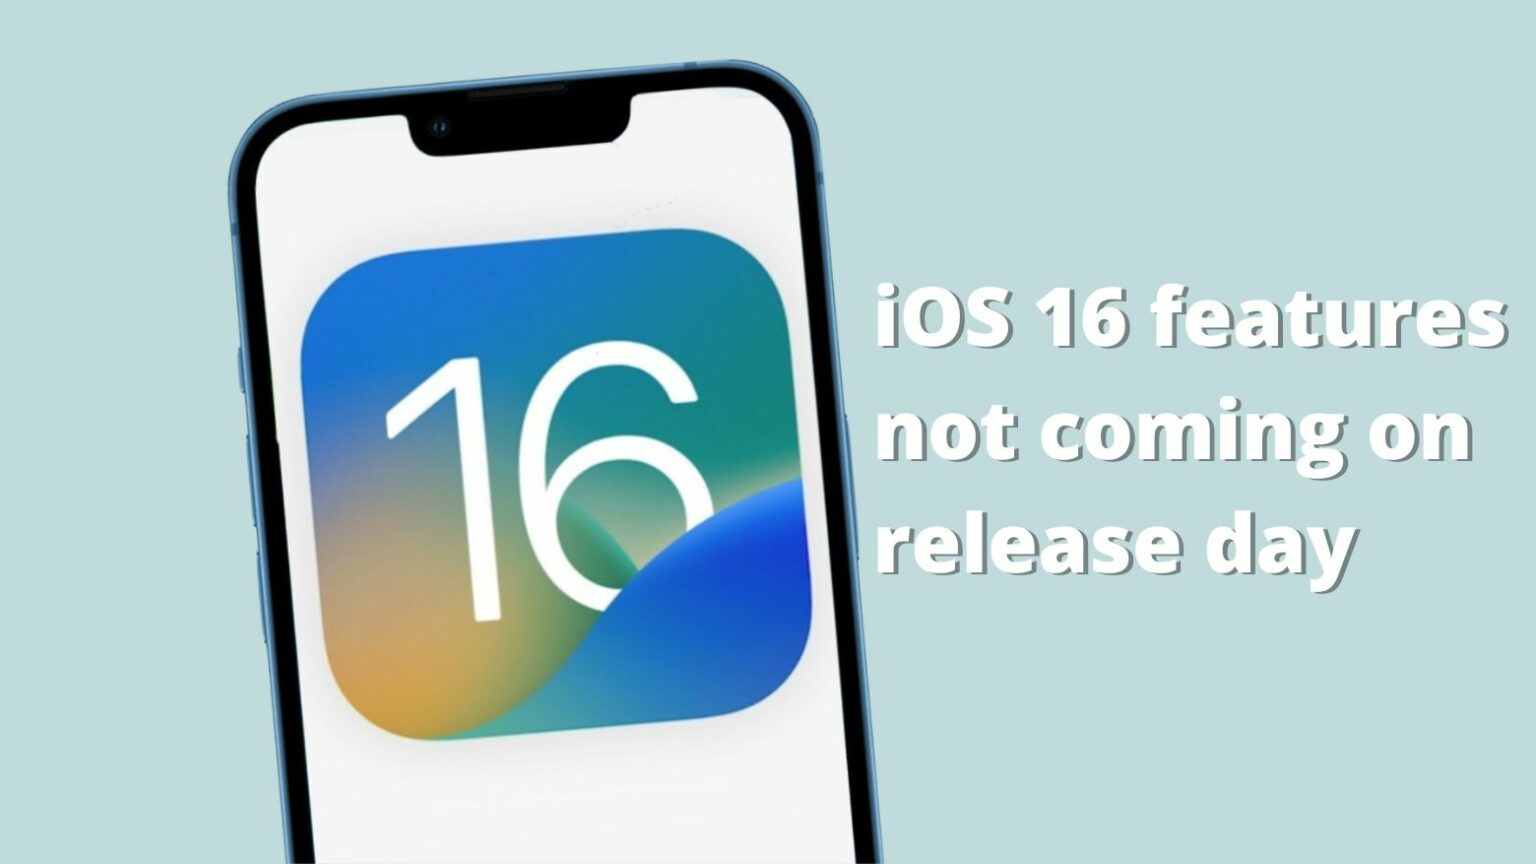 iOS 16 features not coming on release day